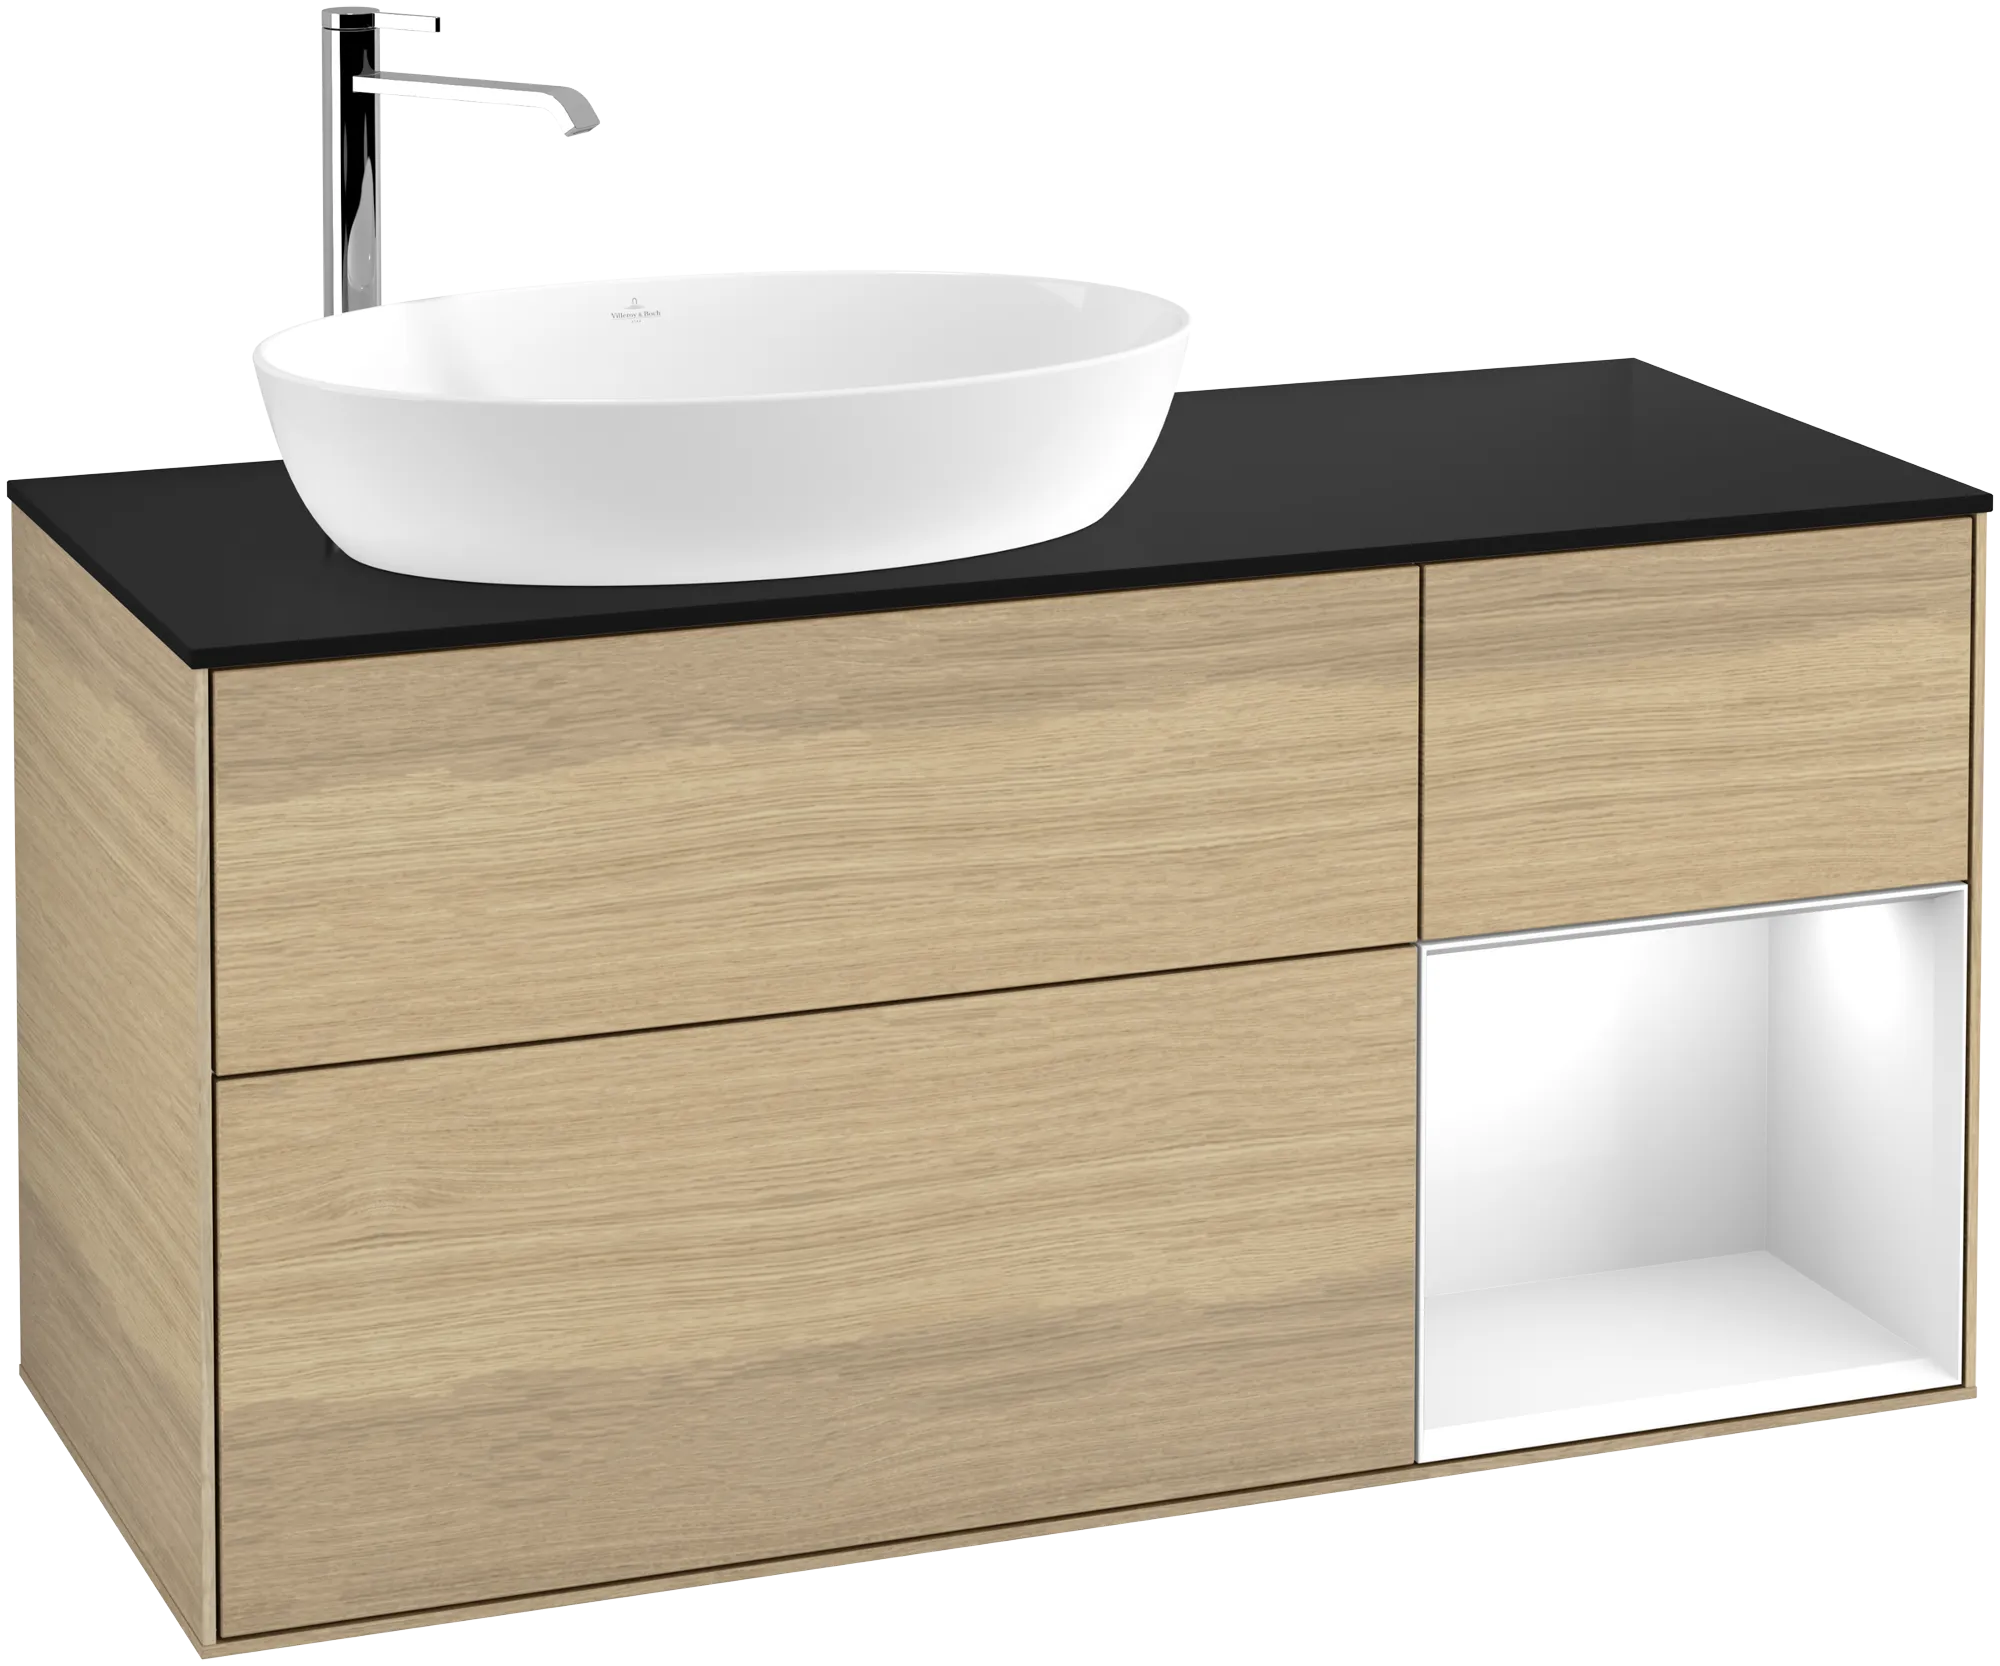 Obrázek VILLEROY BOCH Finion Vanity unit, with lighting, 3 pull-out compartments, 1200 x 603 x 501 mm, Oak Veneer / Glossy White Lacquer / Glass Black Matt #G932GFPC